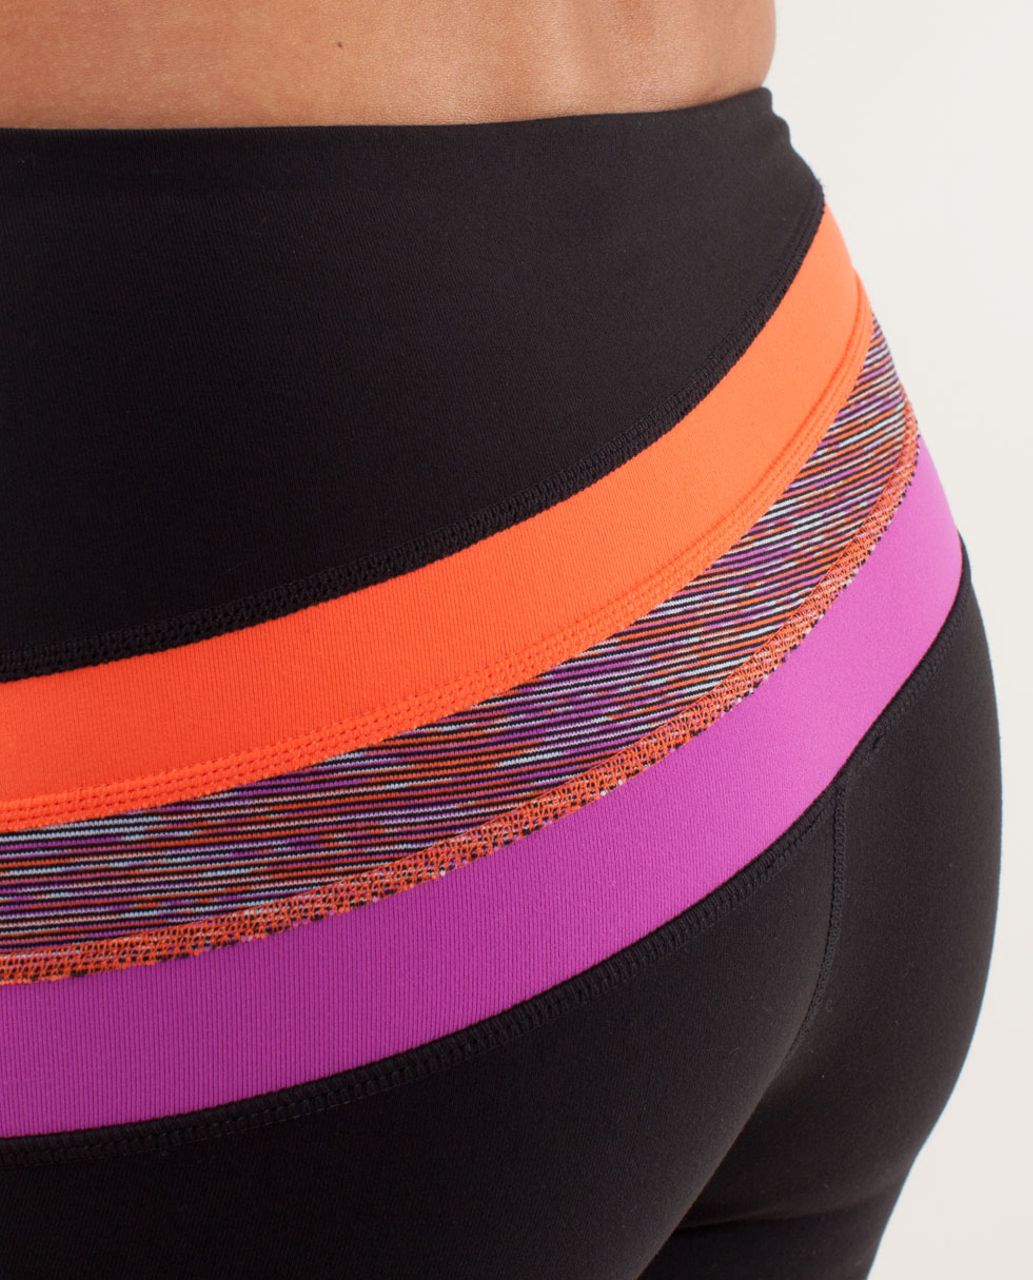 Lululemon Retro Rainbow Crop - Black /  Dazzling /  Wee Are From Space Black March Multi